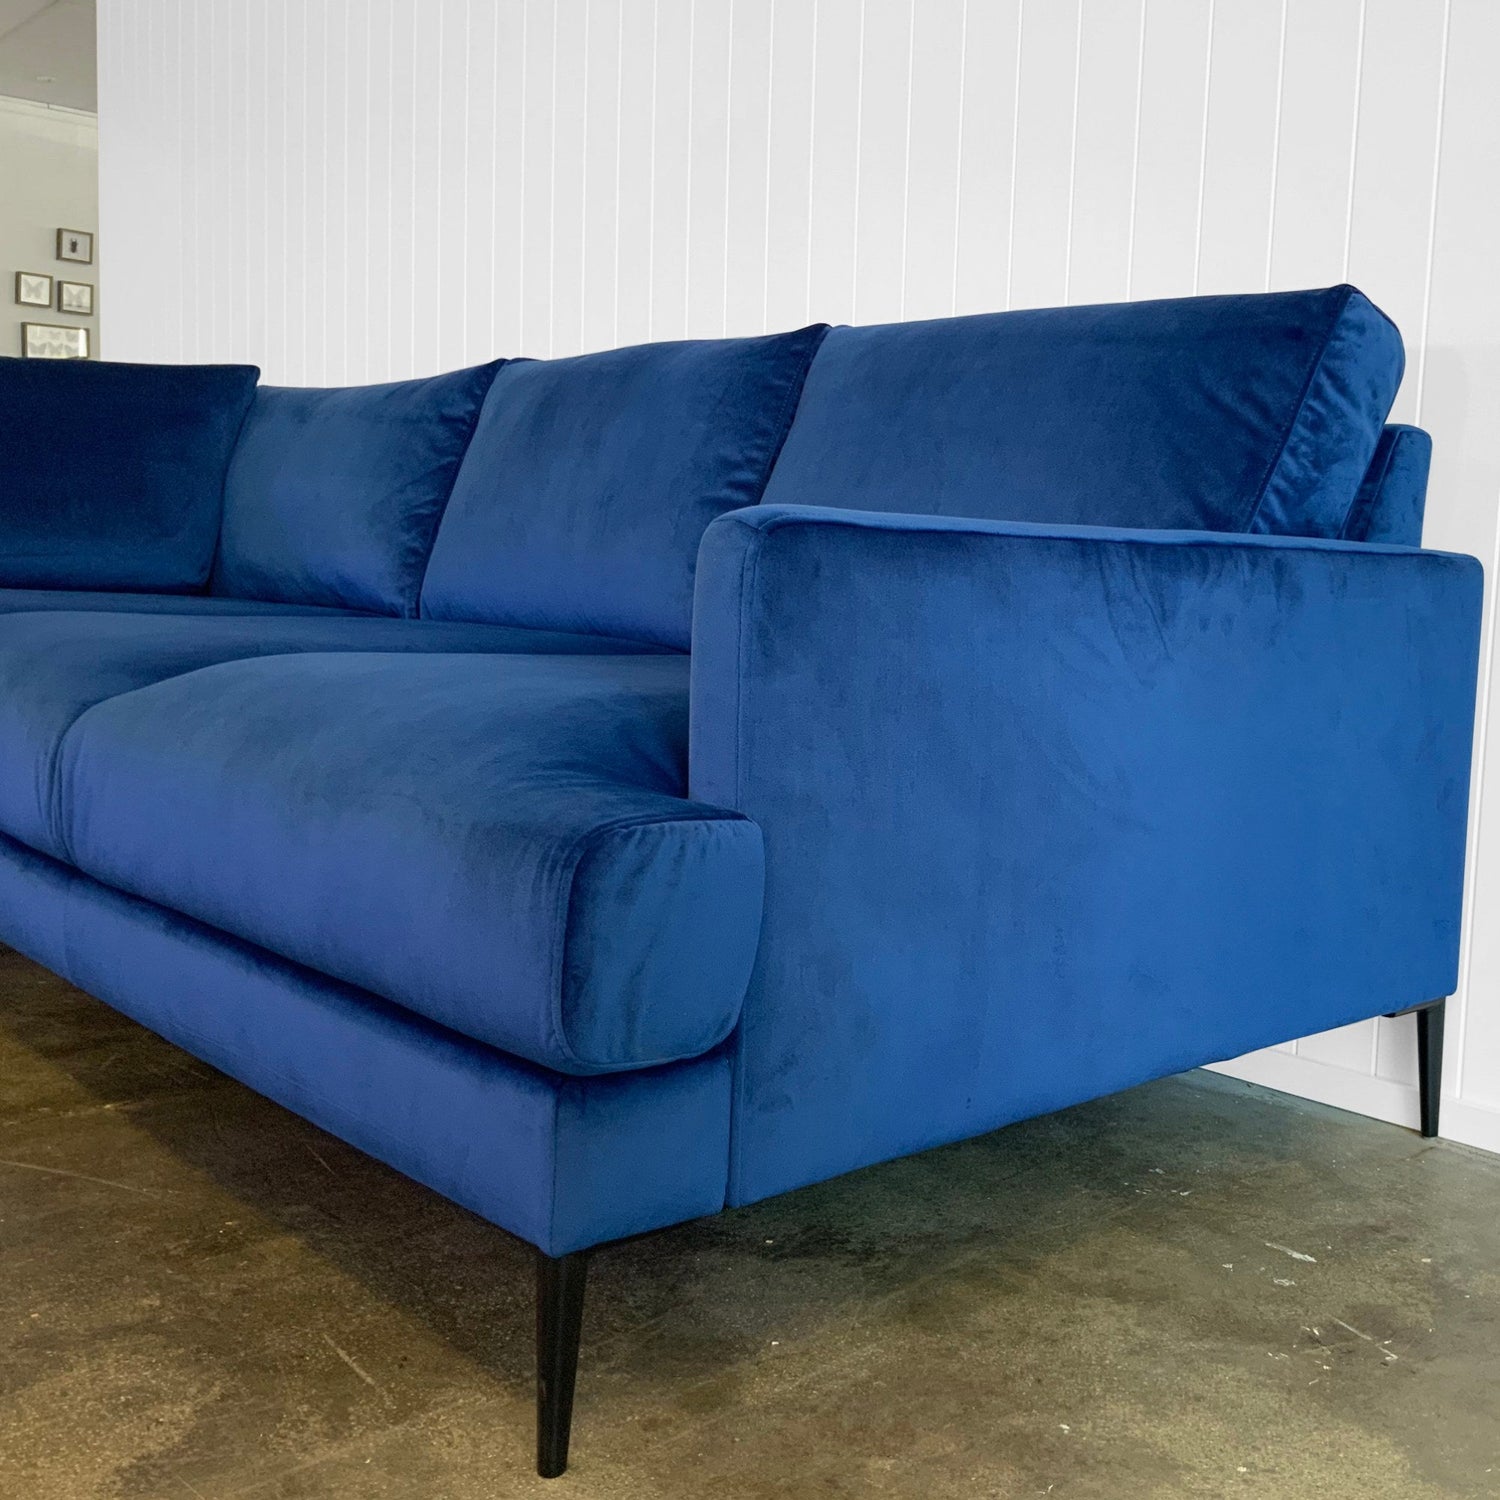 N.y.c. Loft Sofa | Value Fabrics Range Multiple Sizes And Options Available Made To Order In Wa